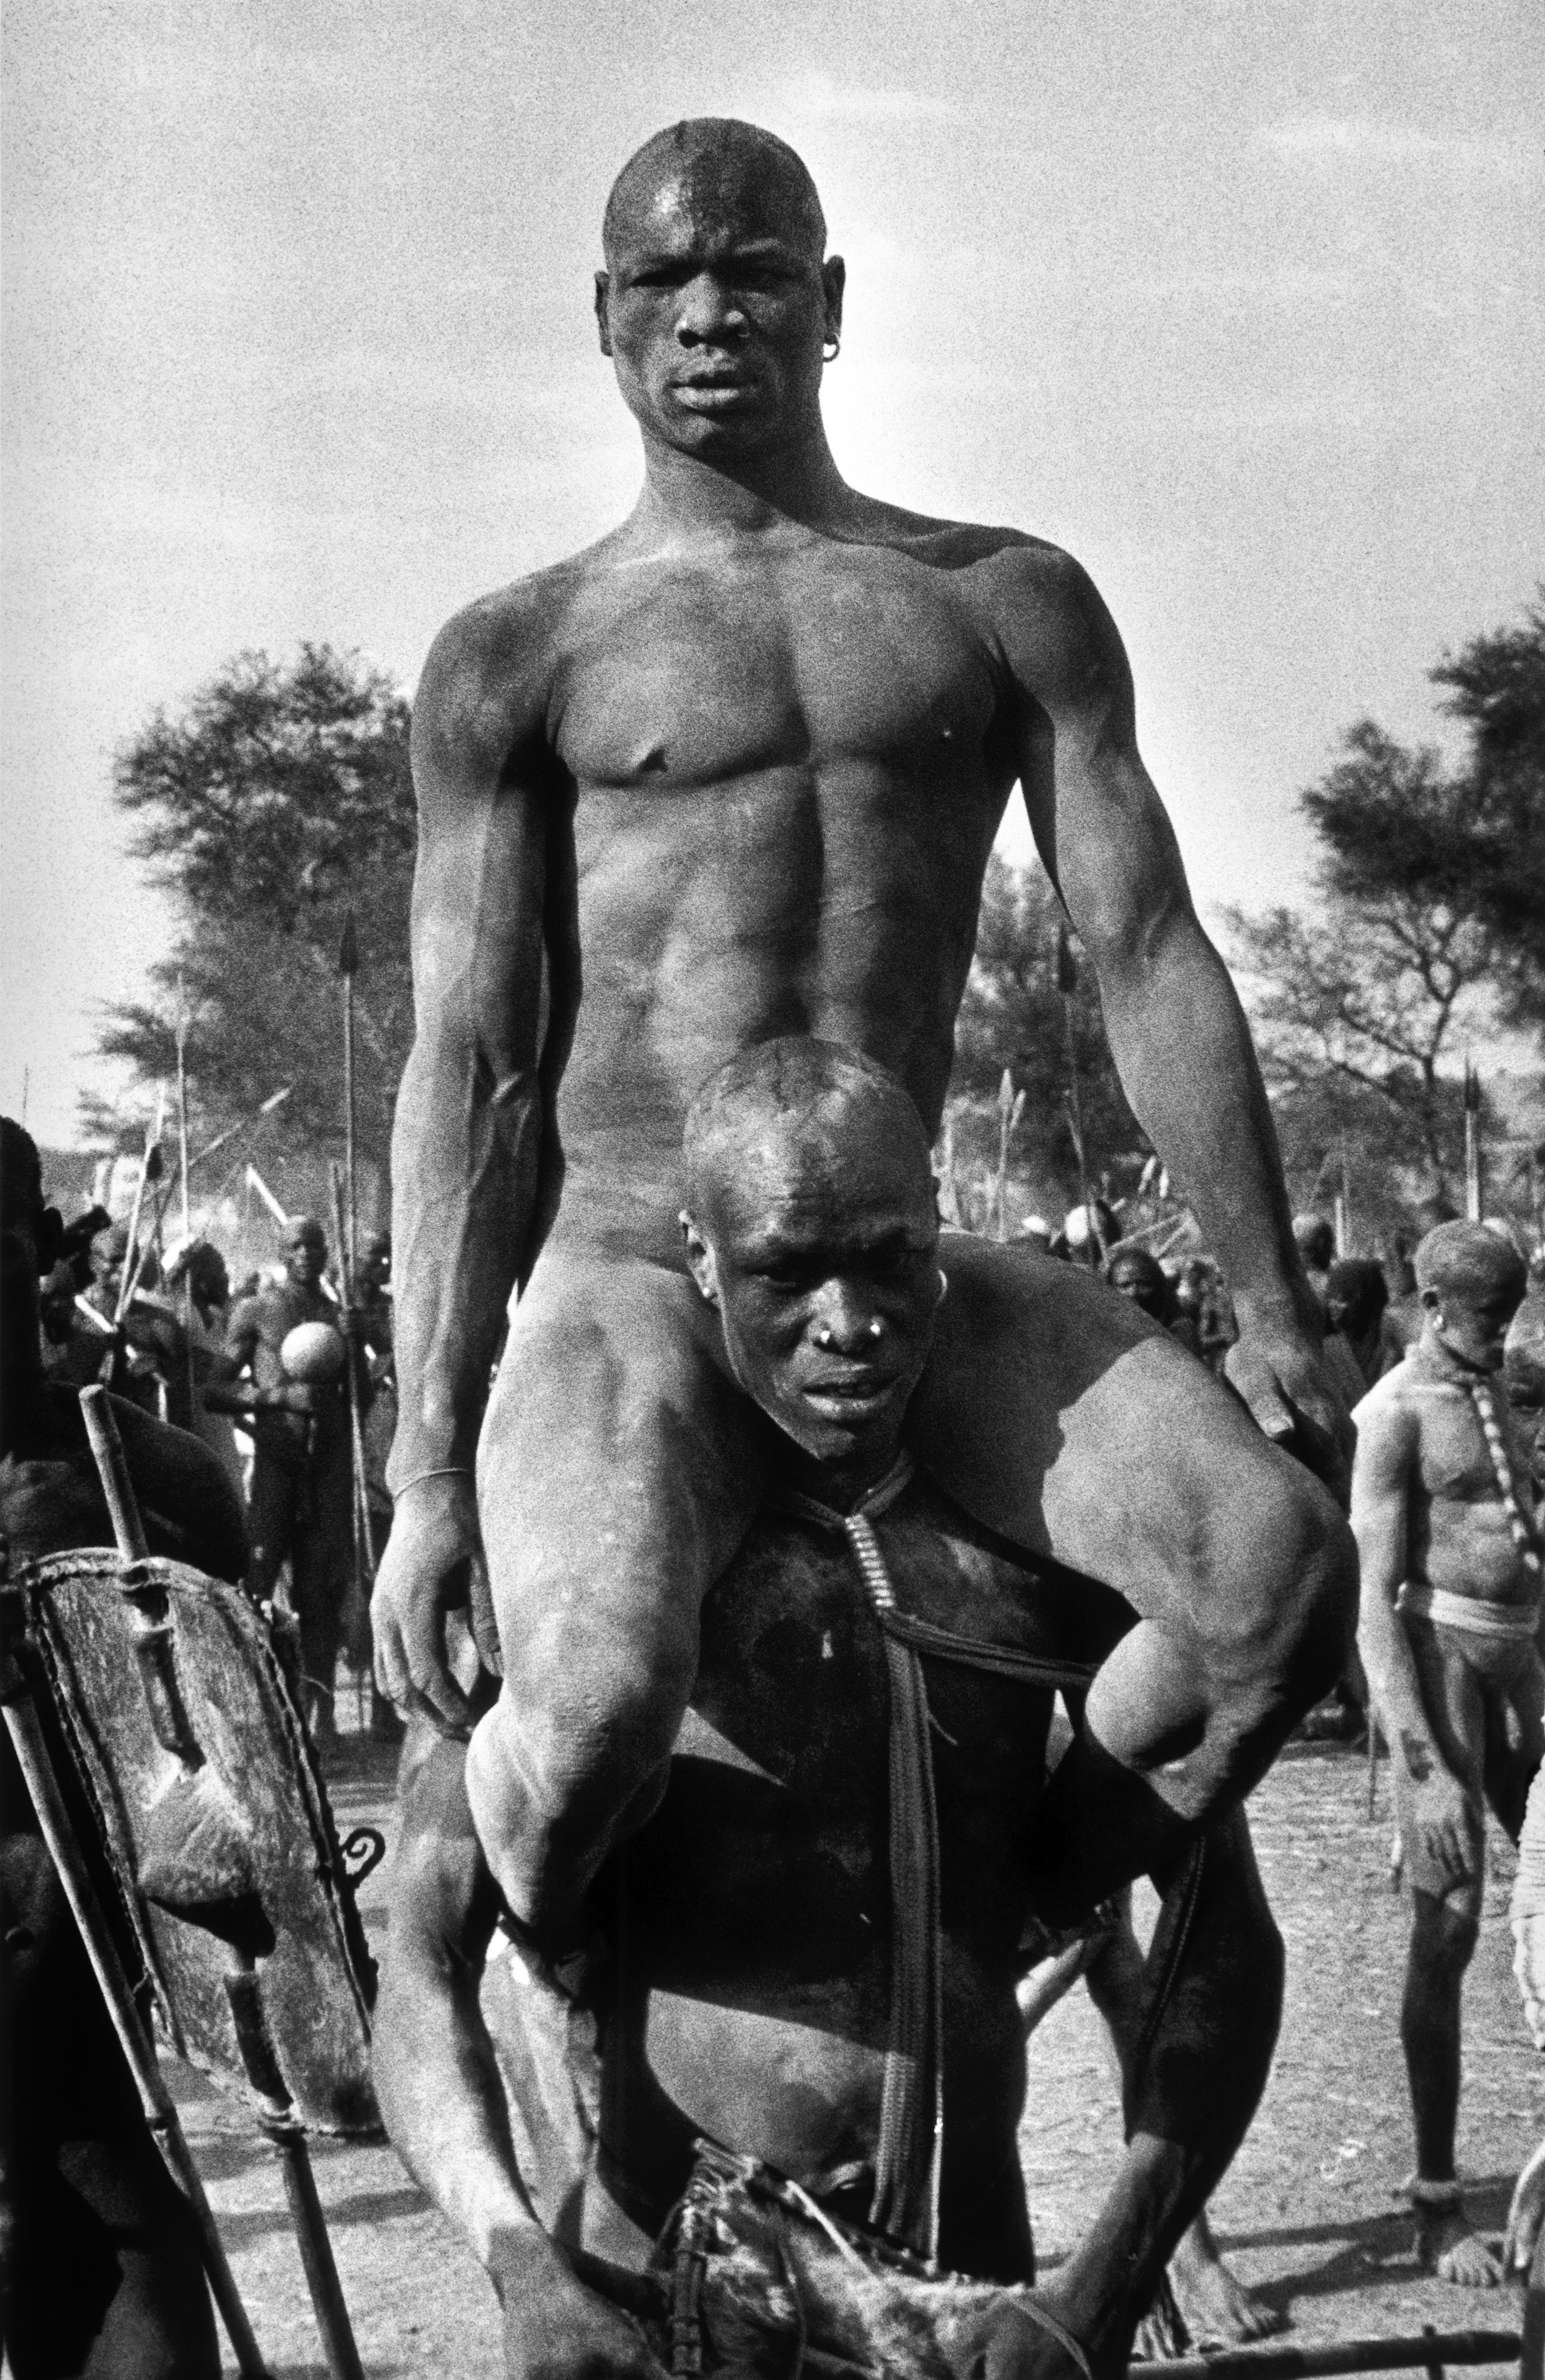 Nuba Wrestlers by George Rodger, 1951